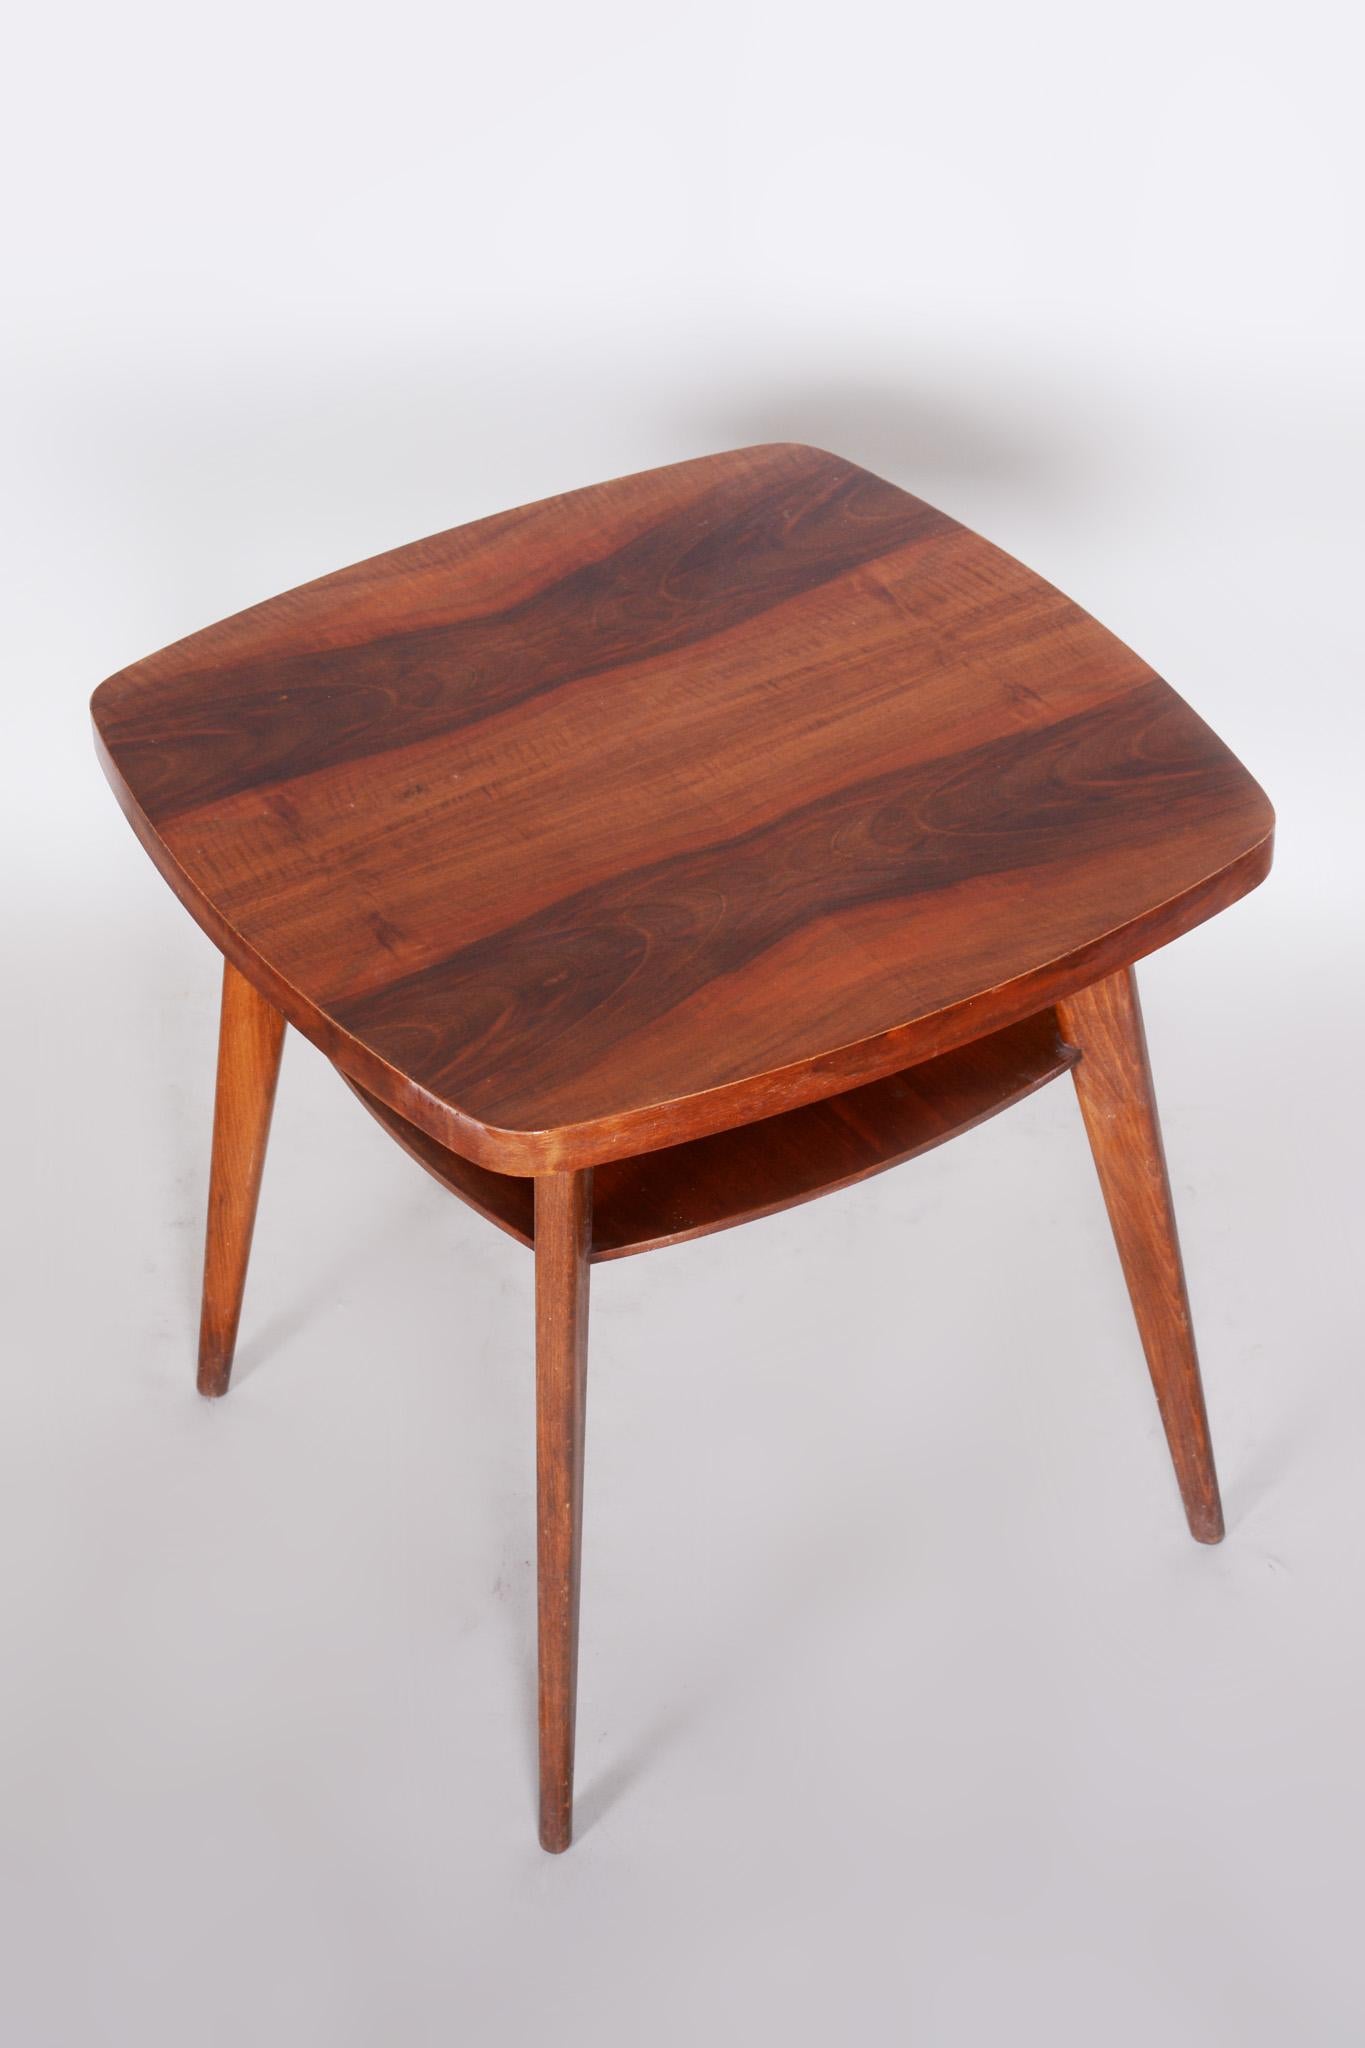 Mid-20th Century Small Walnut Coffee Table, Czech Midcentury, Preserved Original Condition, 1950s